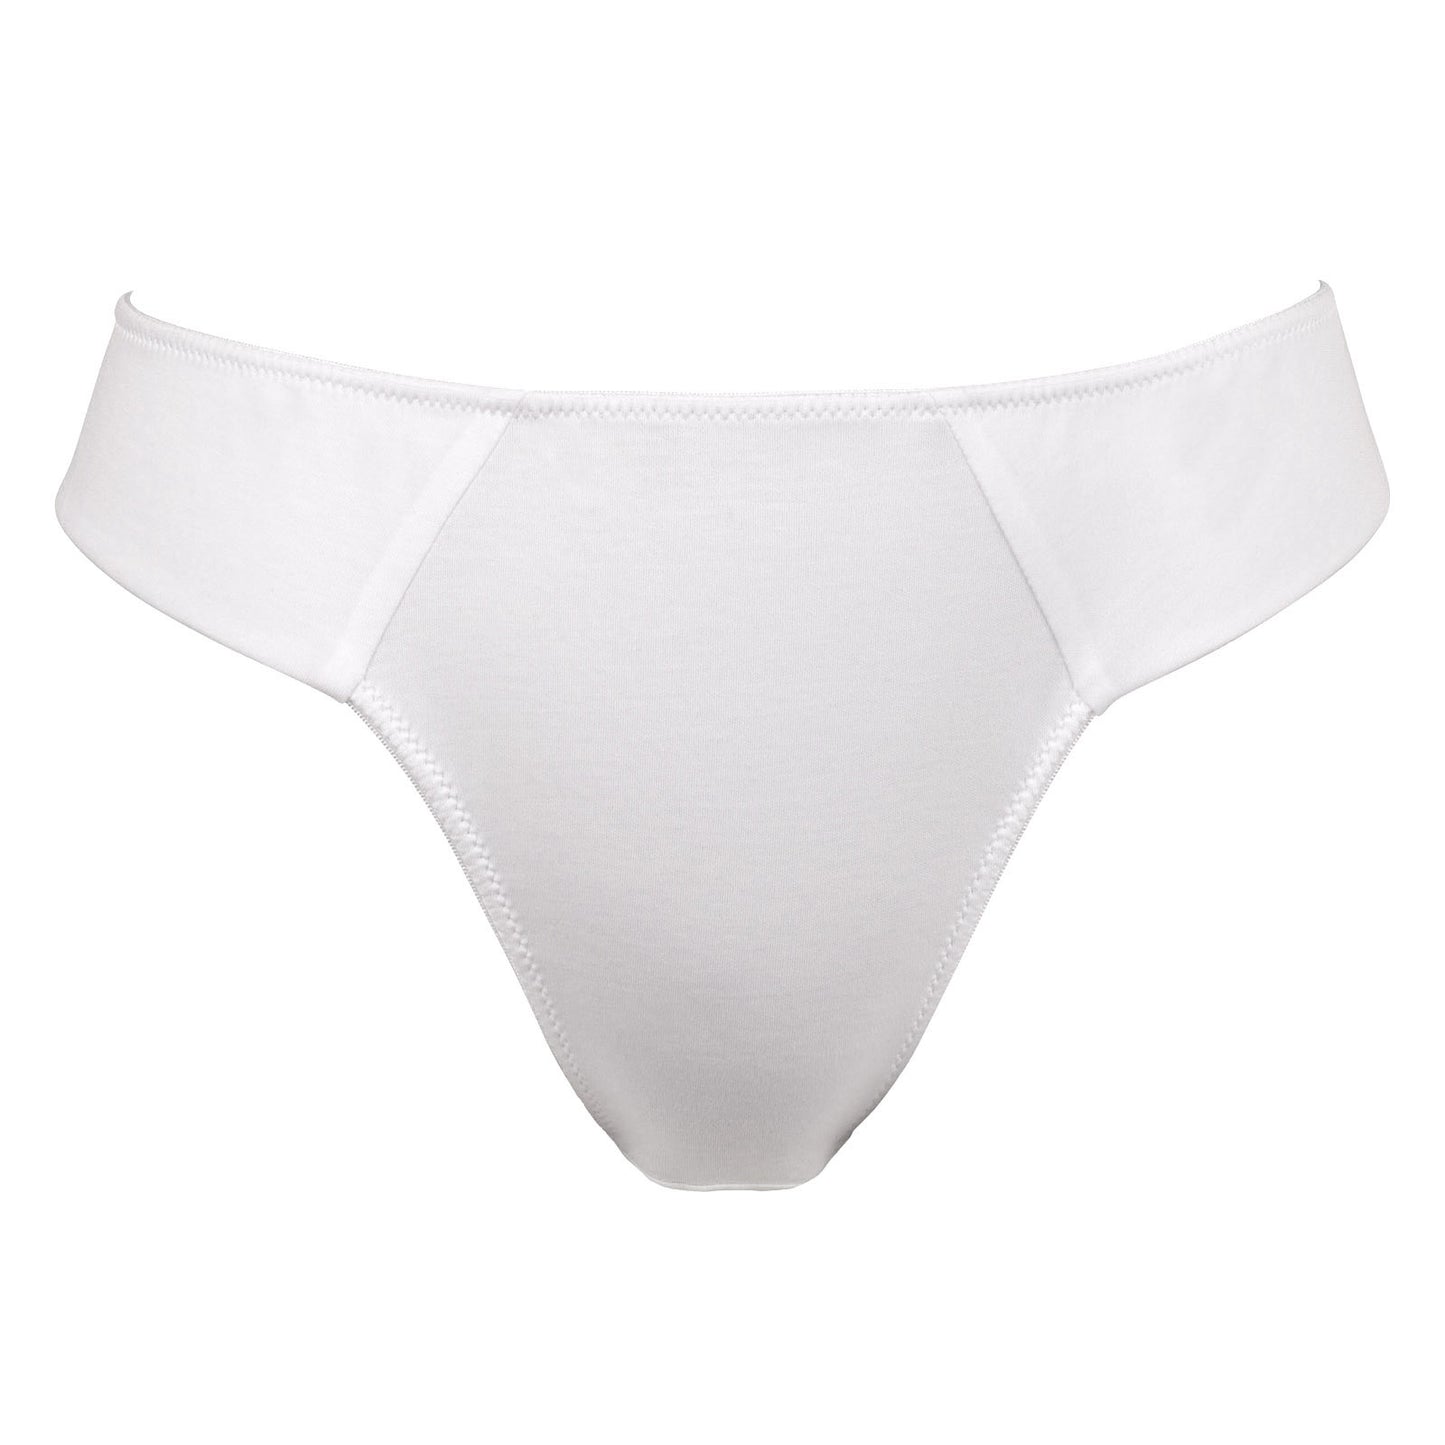 ANGLED THONG, ORGANIC COTTON JERSEY, GOLDEN PALM, 23-25-141